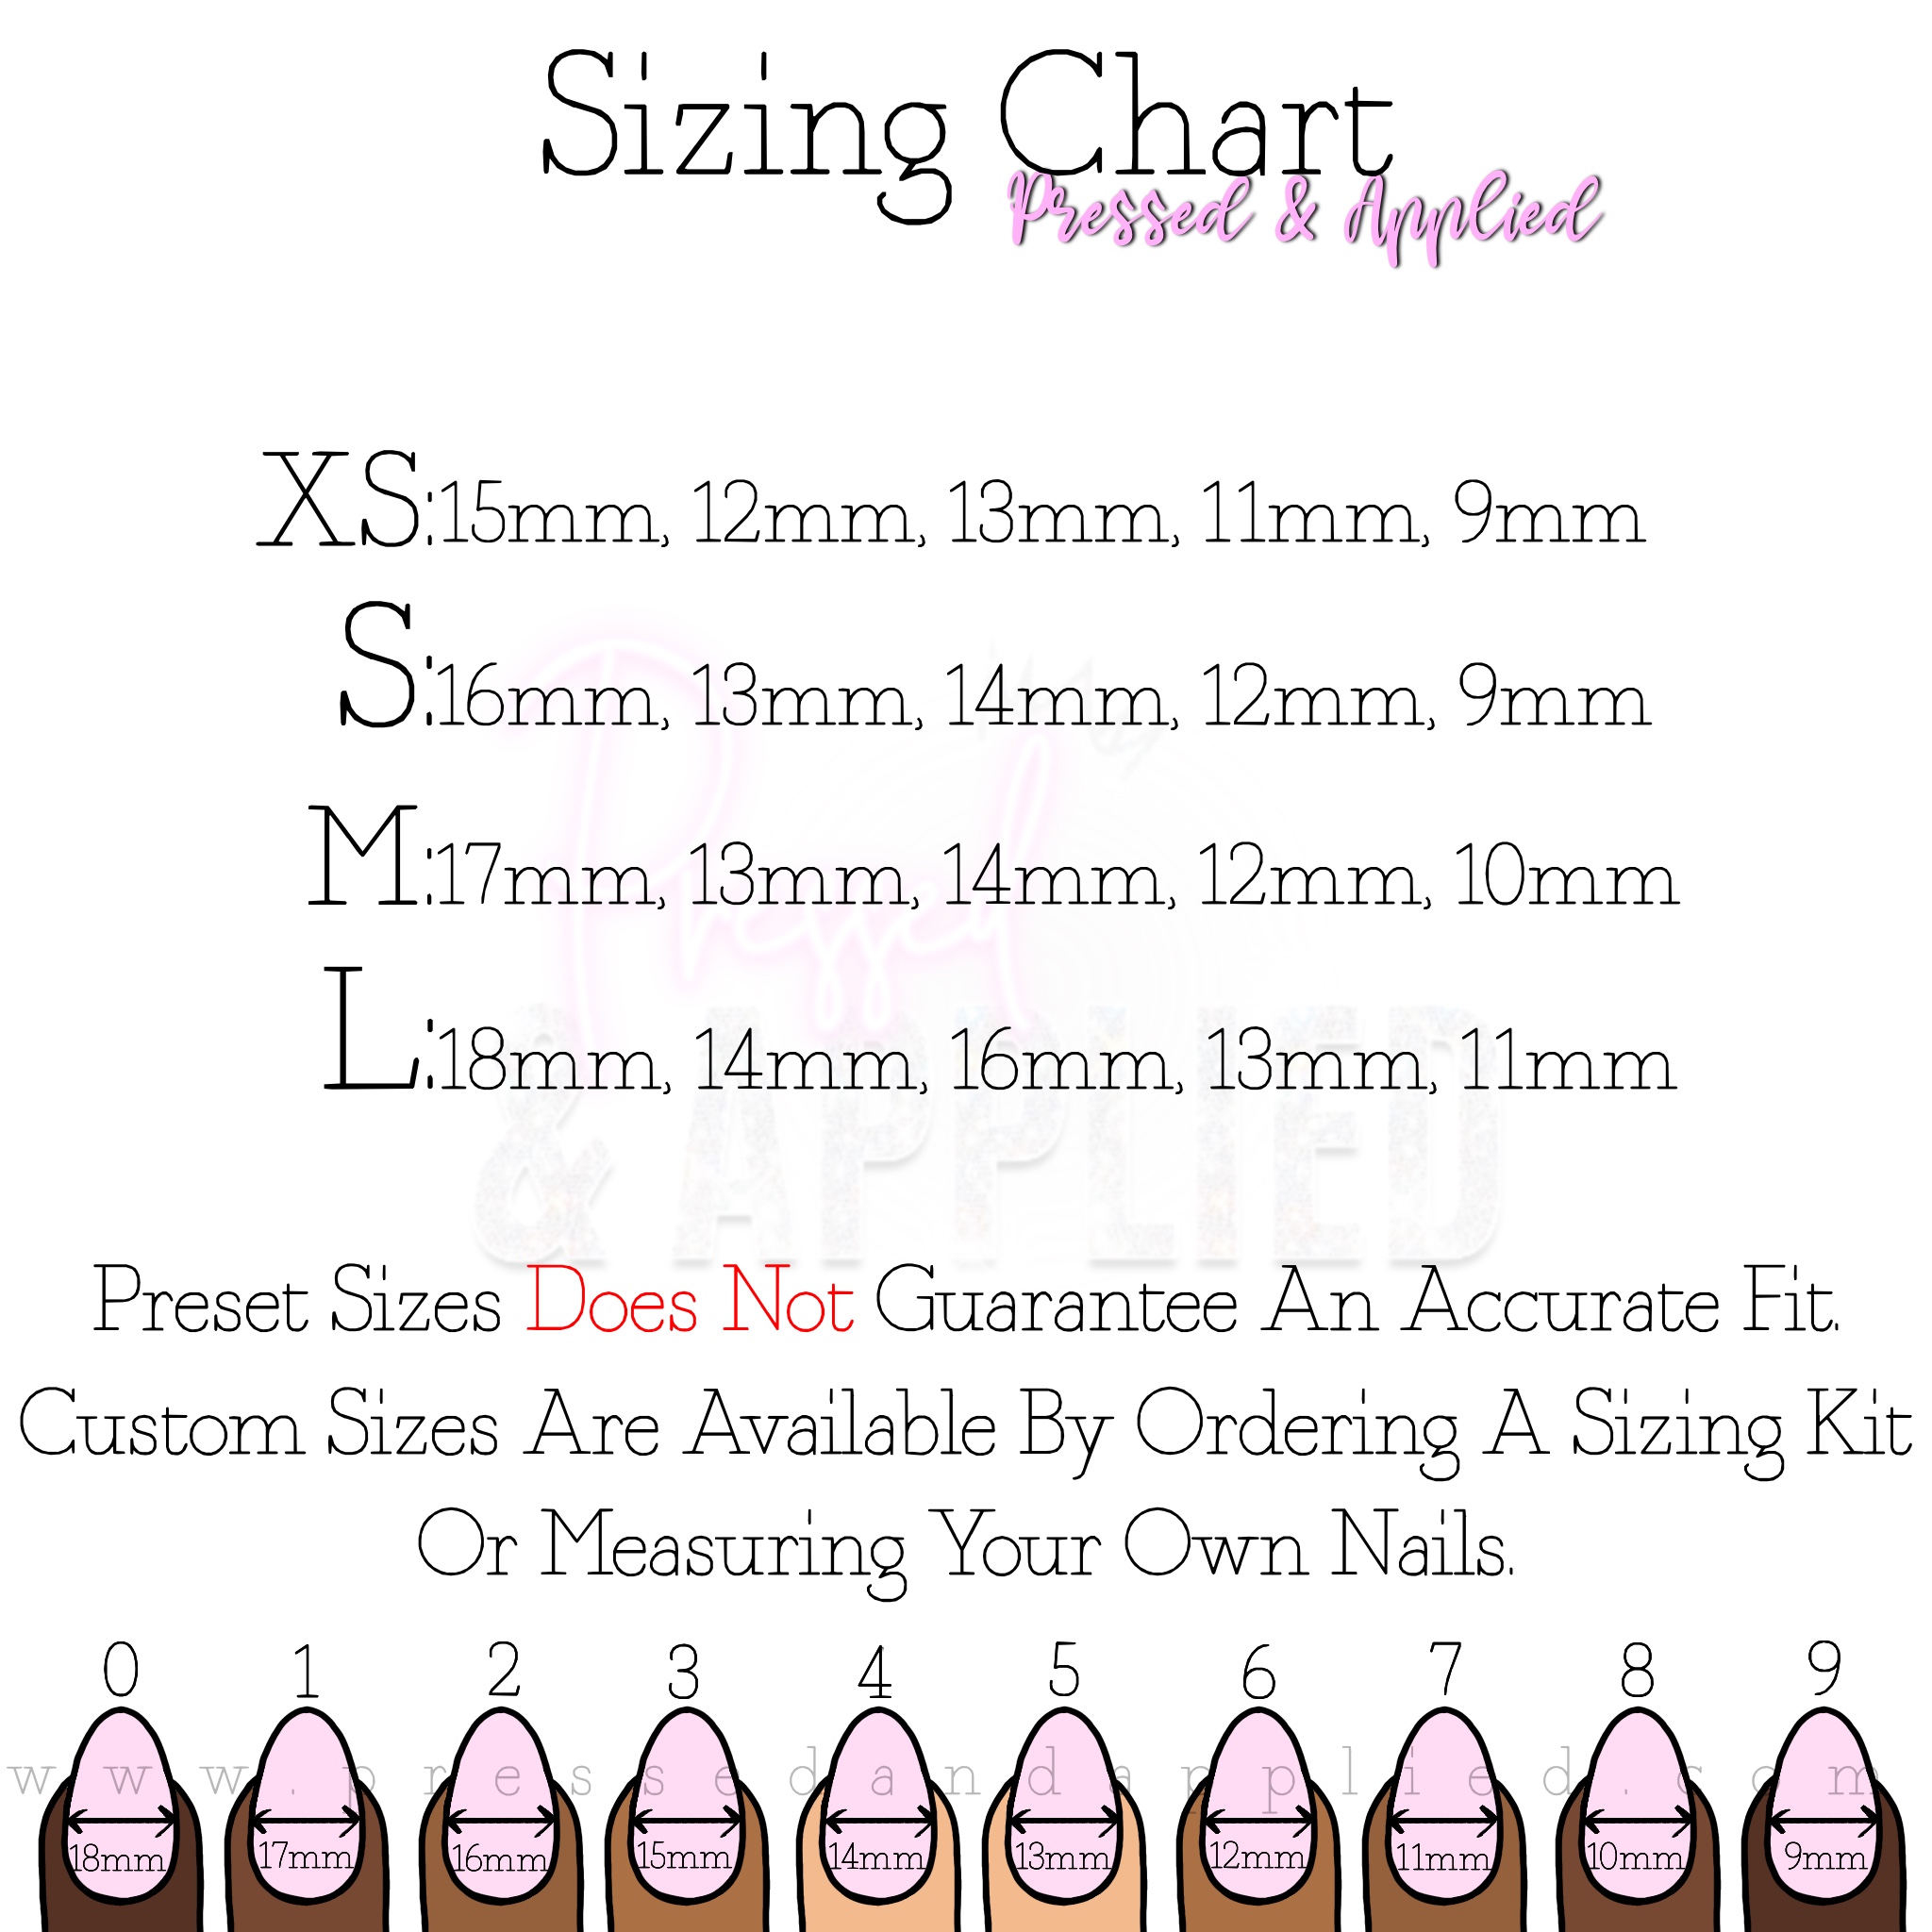 How To + Sizing Guide